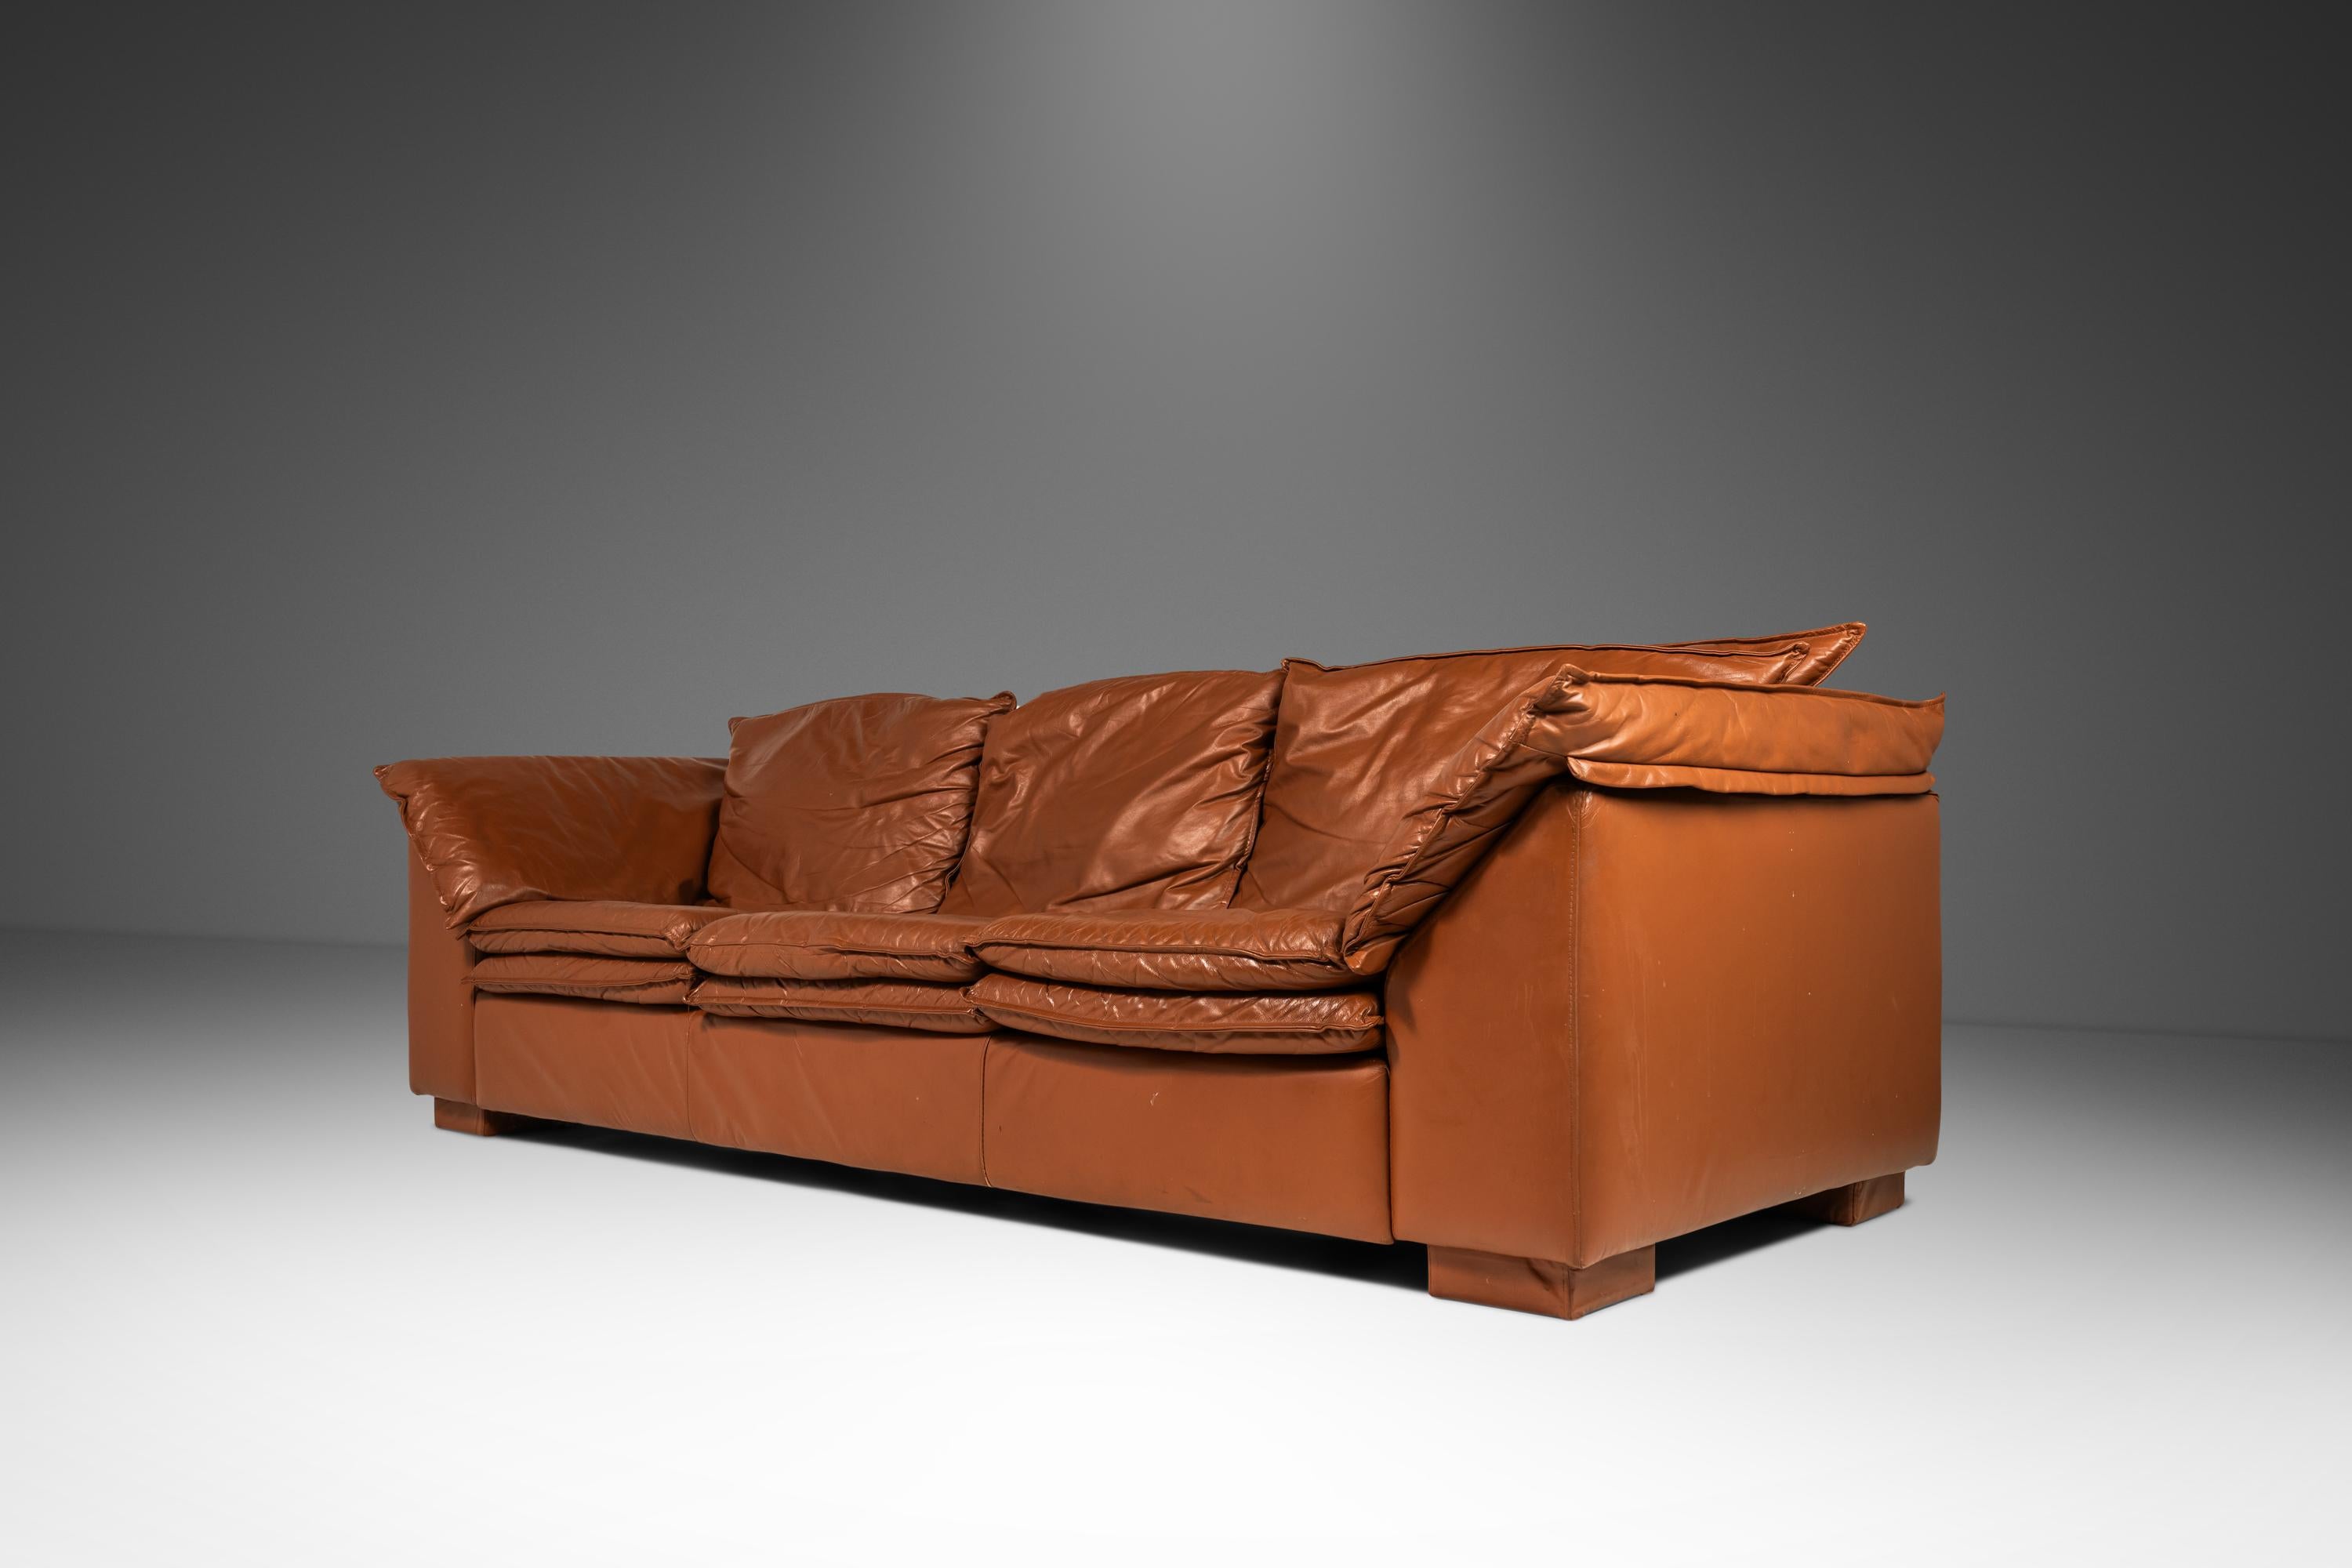 Set of 2 Low Profile Sofa & Loveseat in Leather After Niels Eilersen, c. 1990's In Fair Condition For Sale In Deland, FL